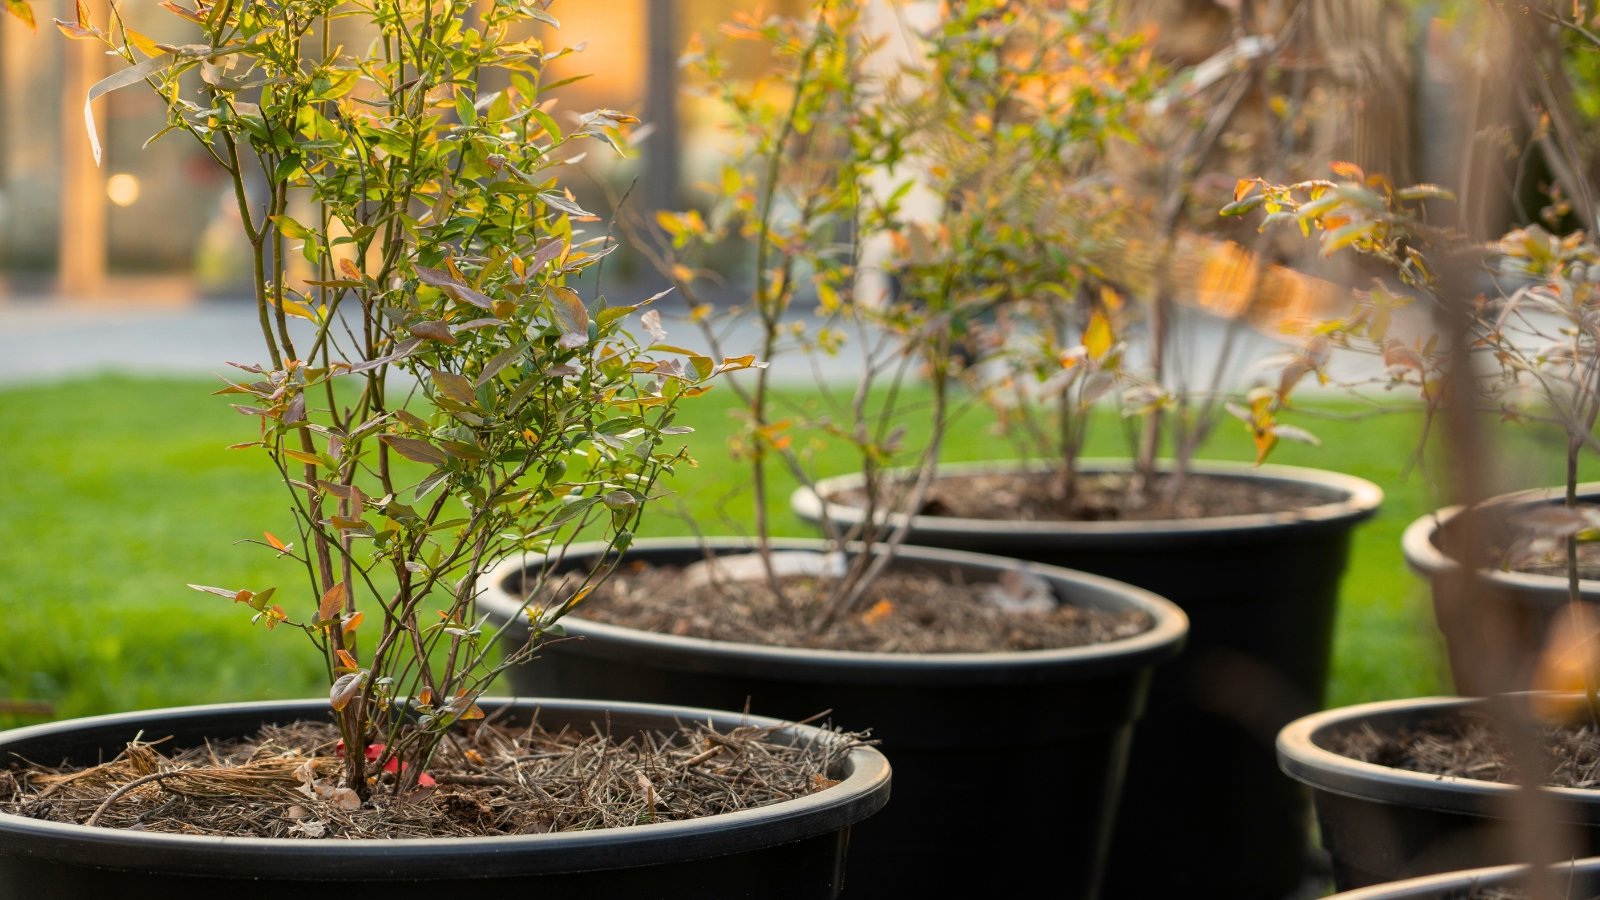 The young blueberry bushes in large black pots feature slender branches with clusters of vibrant green, oval leaves.